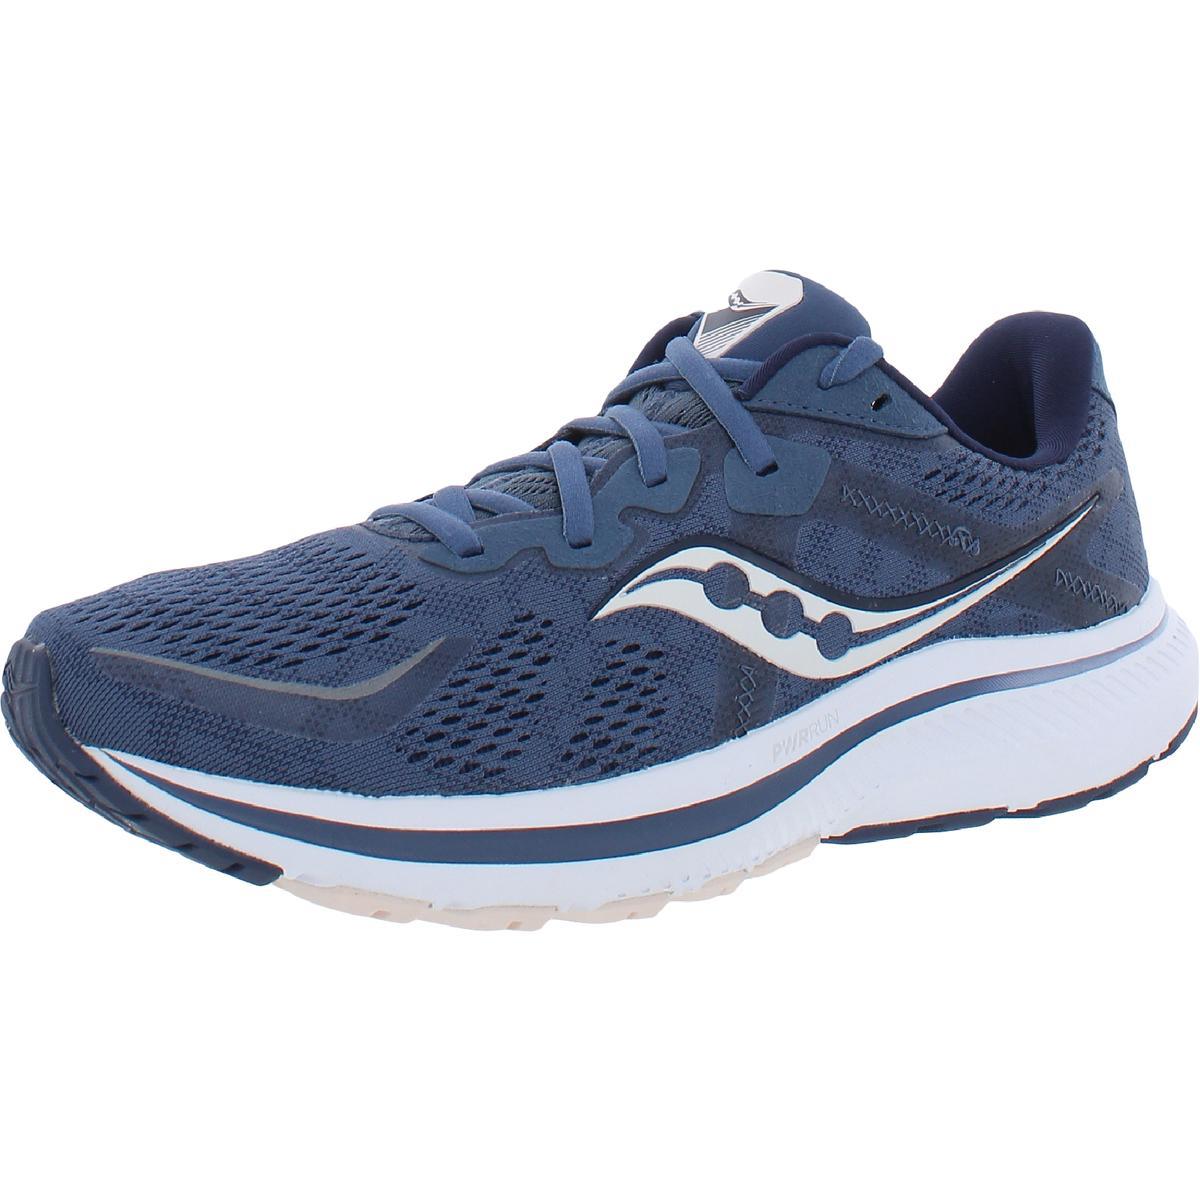 Saucony Womens Omni 20 Fitness Lace Up Gym Running Shoes Sneakers Bhfo 9445 Indigo/Blush